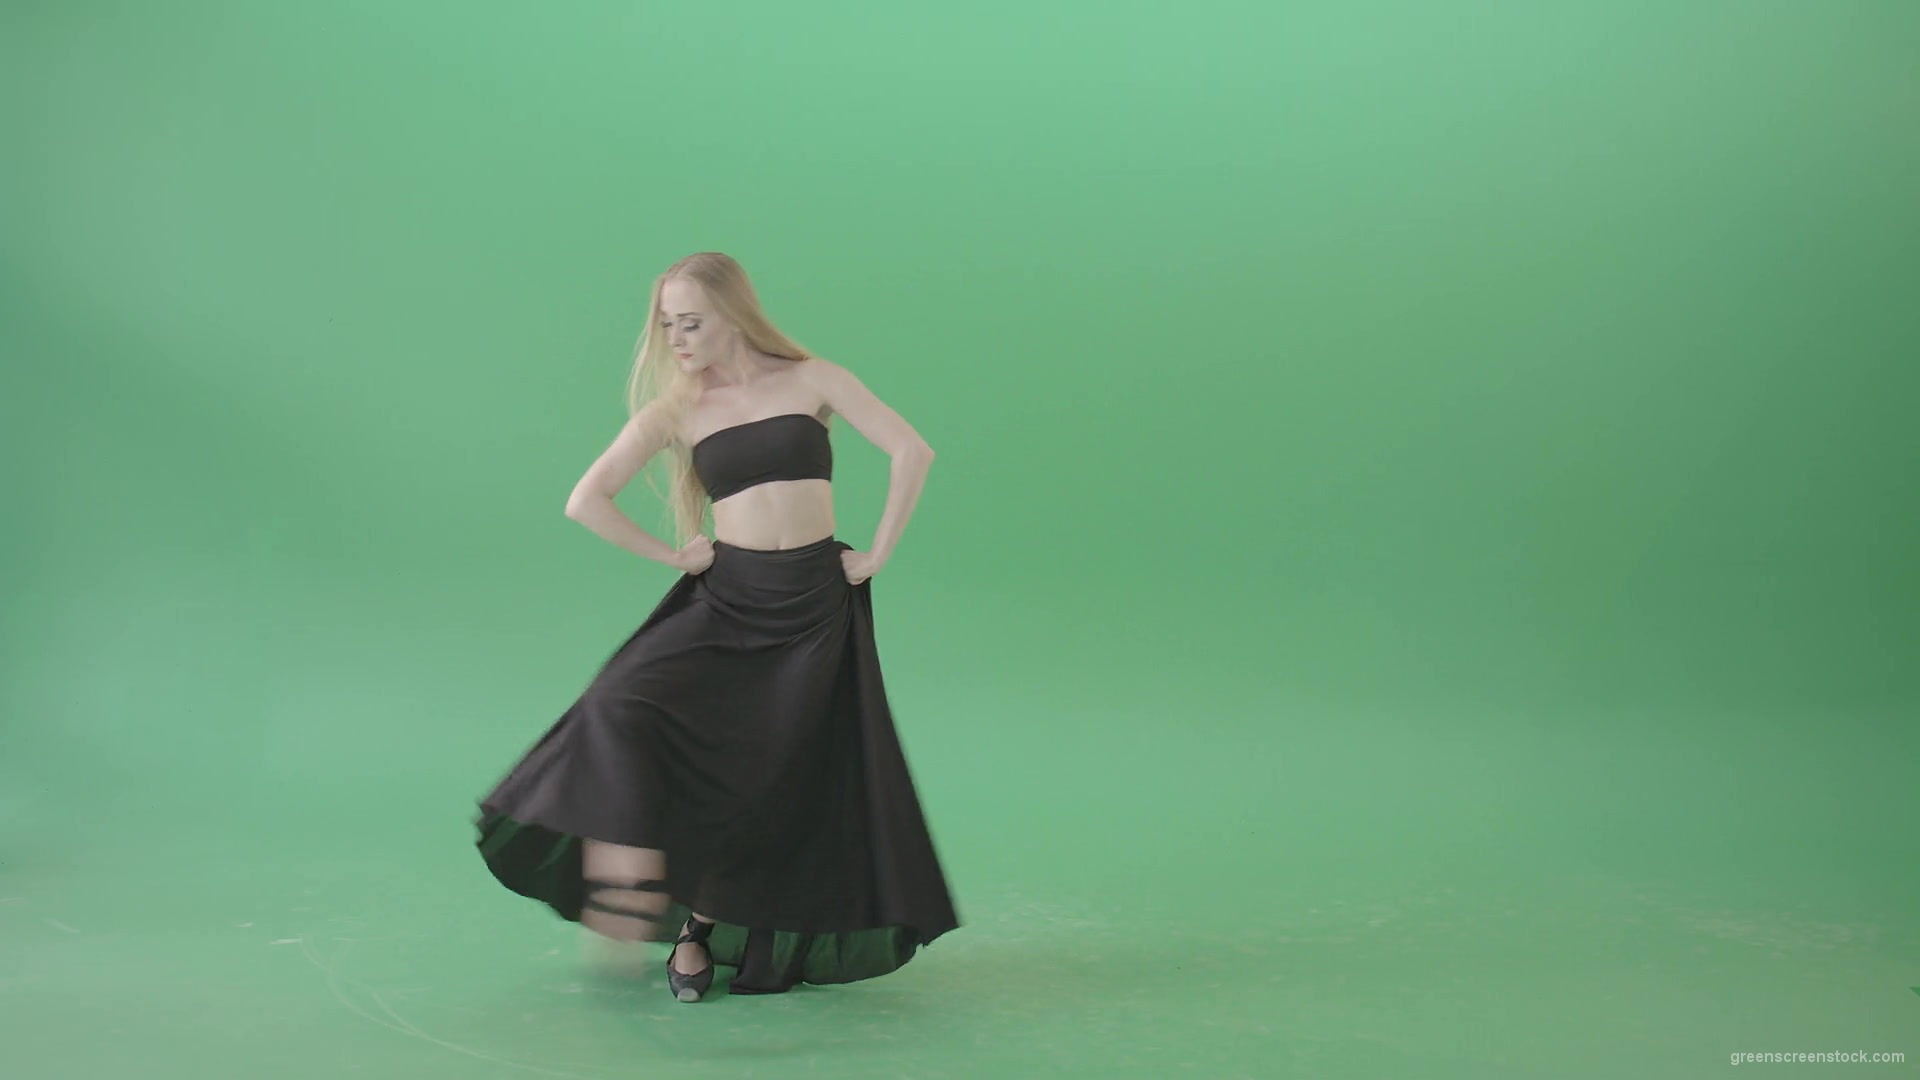 Hot-passion-ballet-girl-in-black-dress-dancing-on-green-screen-4K-Video-Footage-1920_006 Green Screen Stock